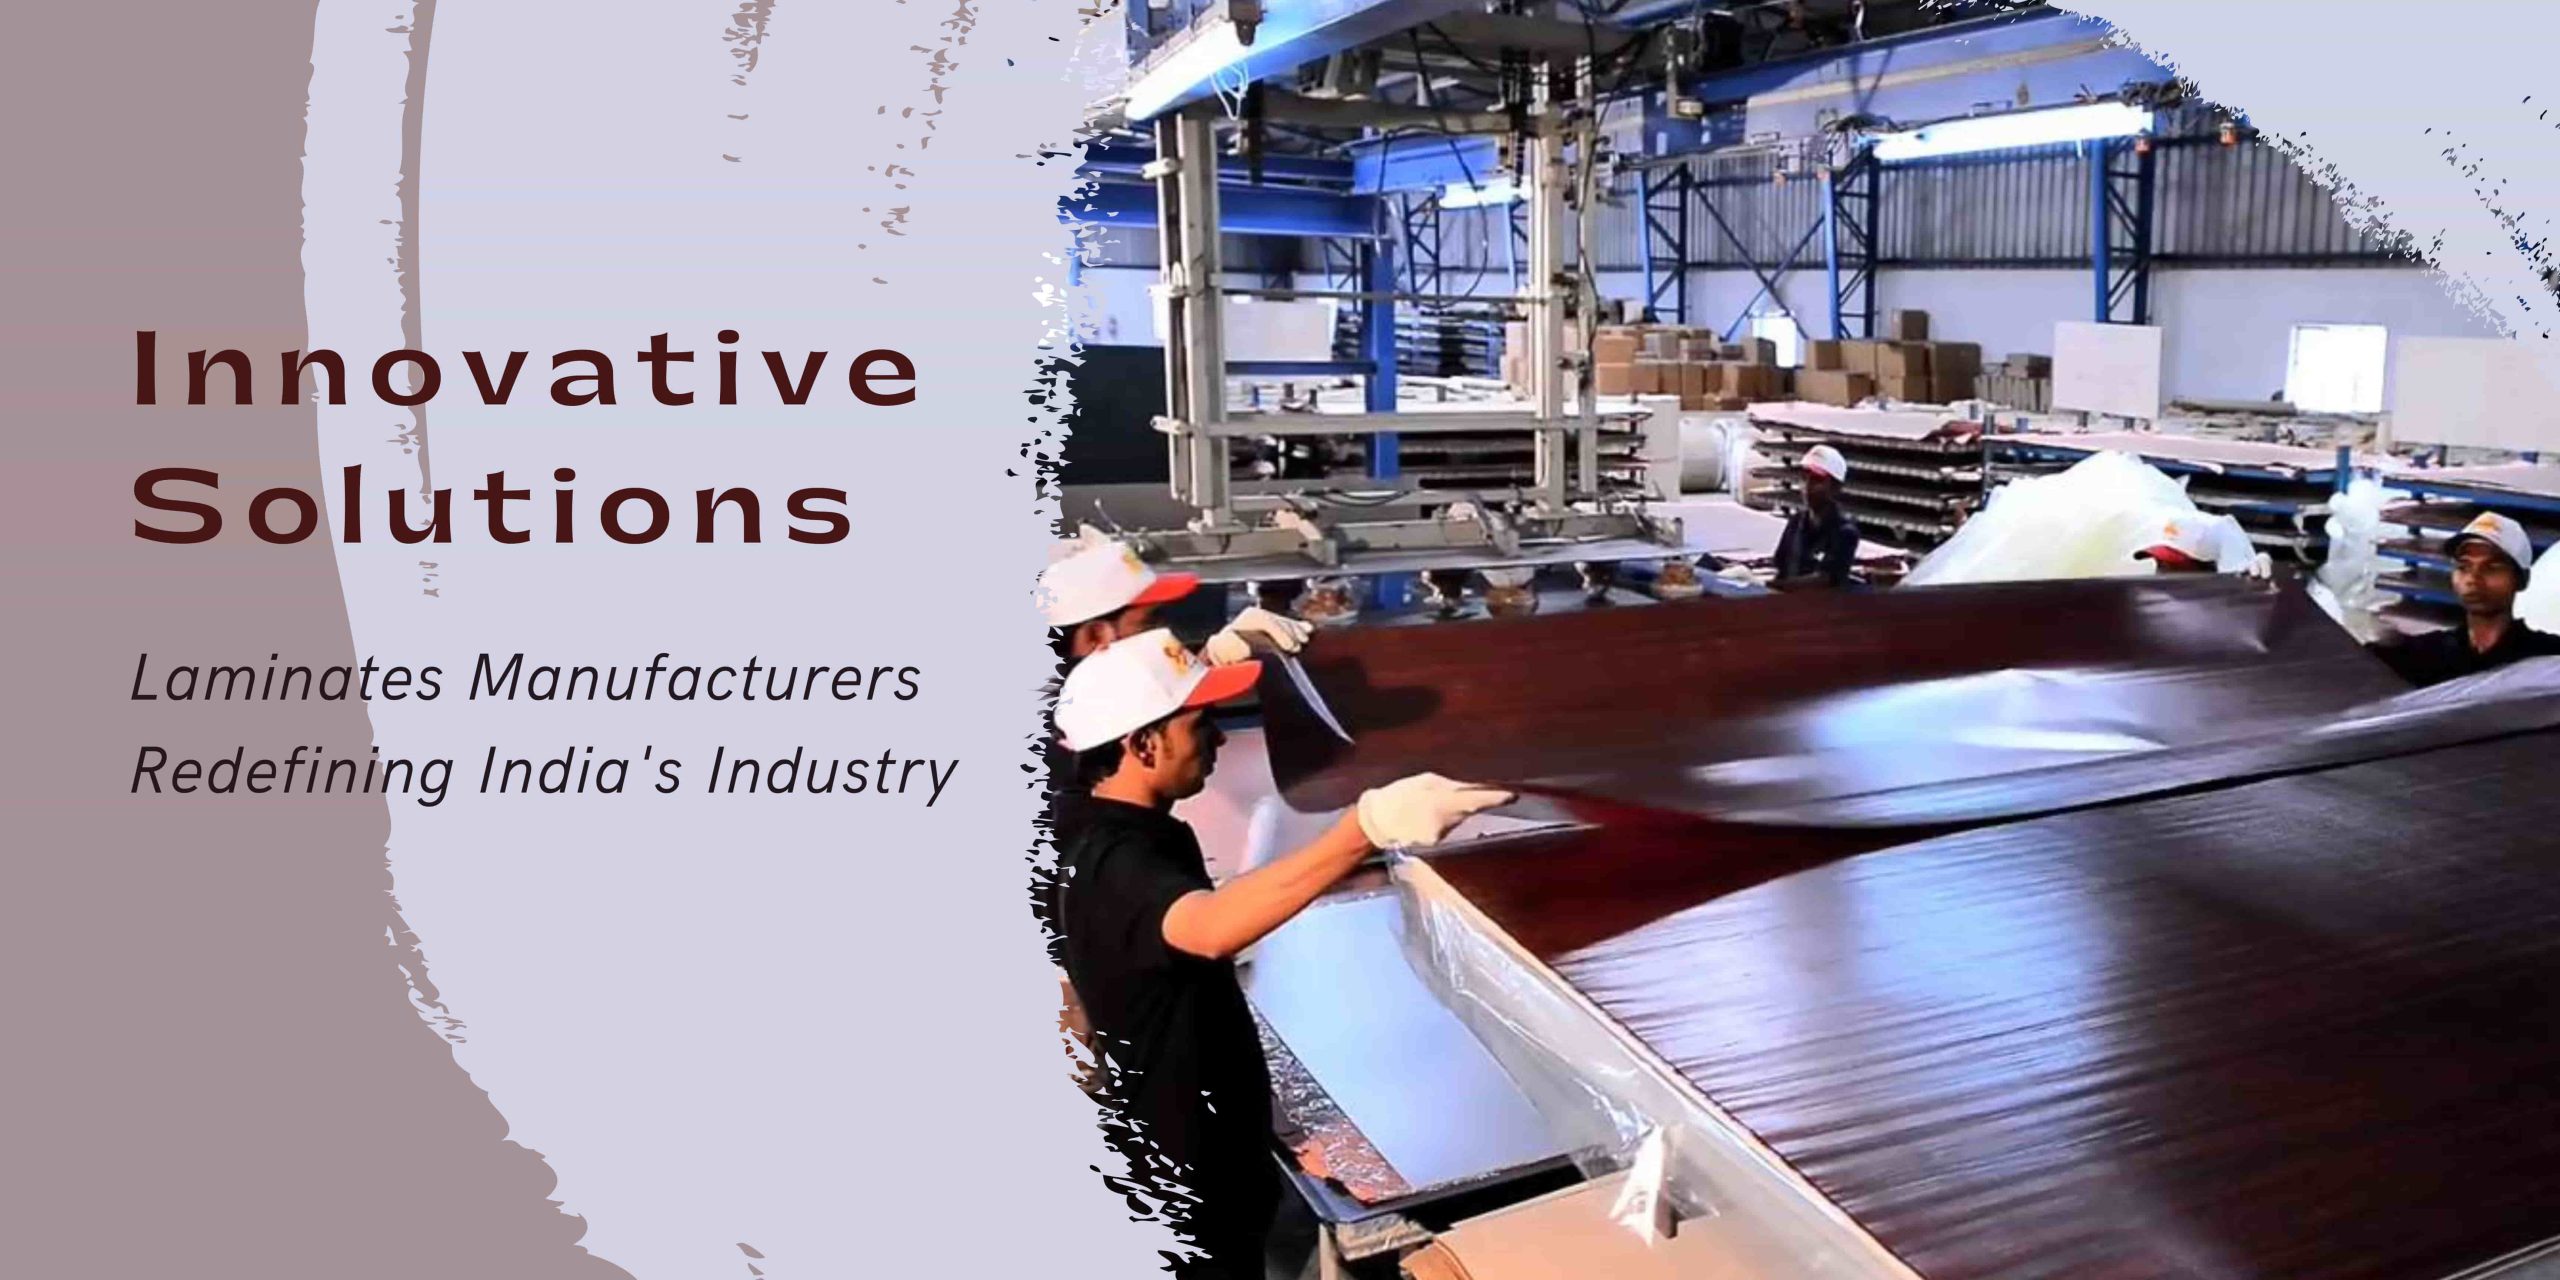 Innovative Solutions - Laminates Manufacturers Redefining India's Industry